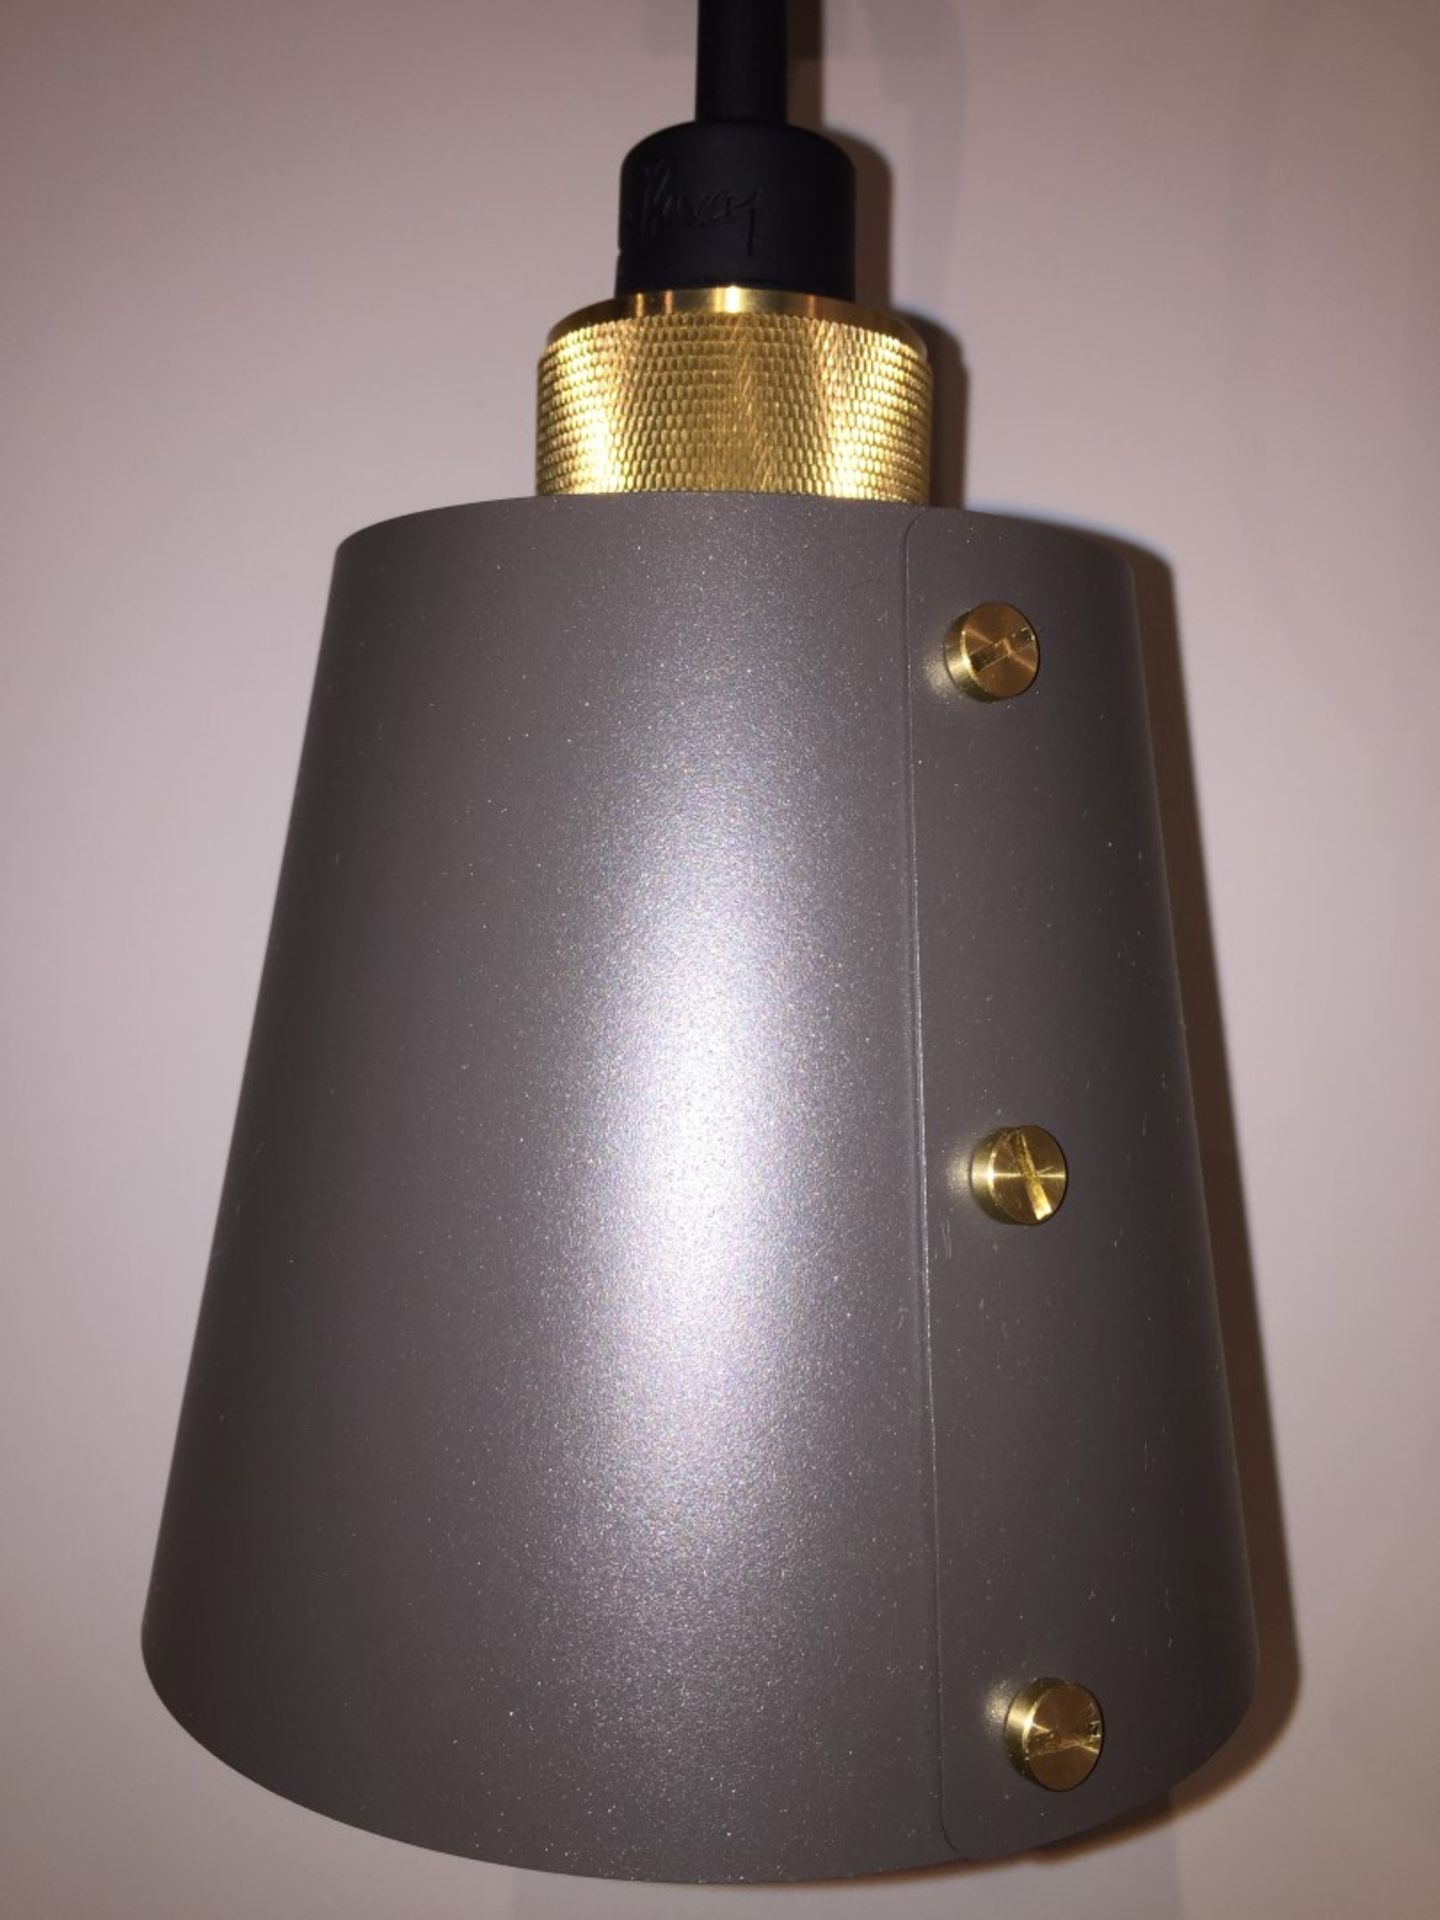 1 x BUSTER + PUNCH Hooked Wall Light With Metal Shade - Ref: WS/FF160A - CL204 - Location: London Ci - Image 3 of 9